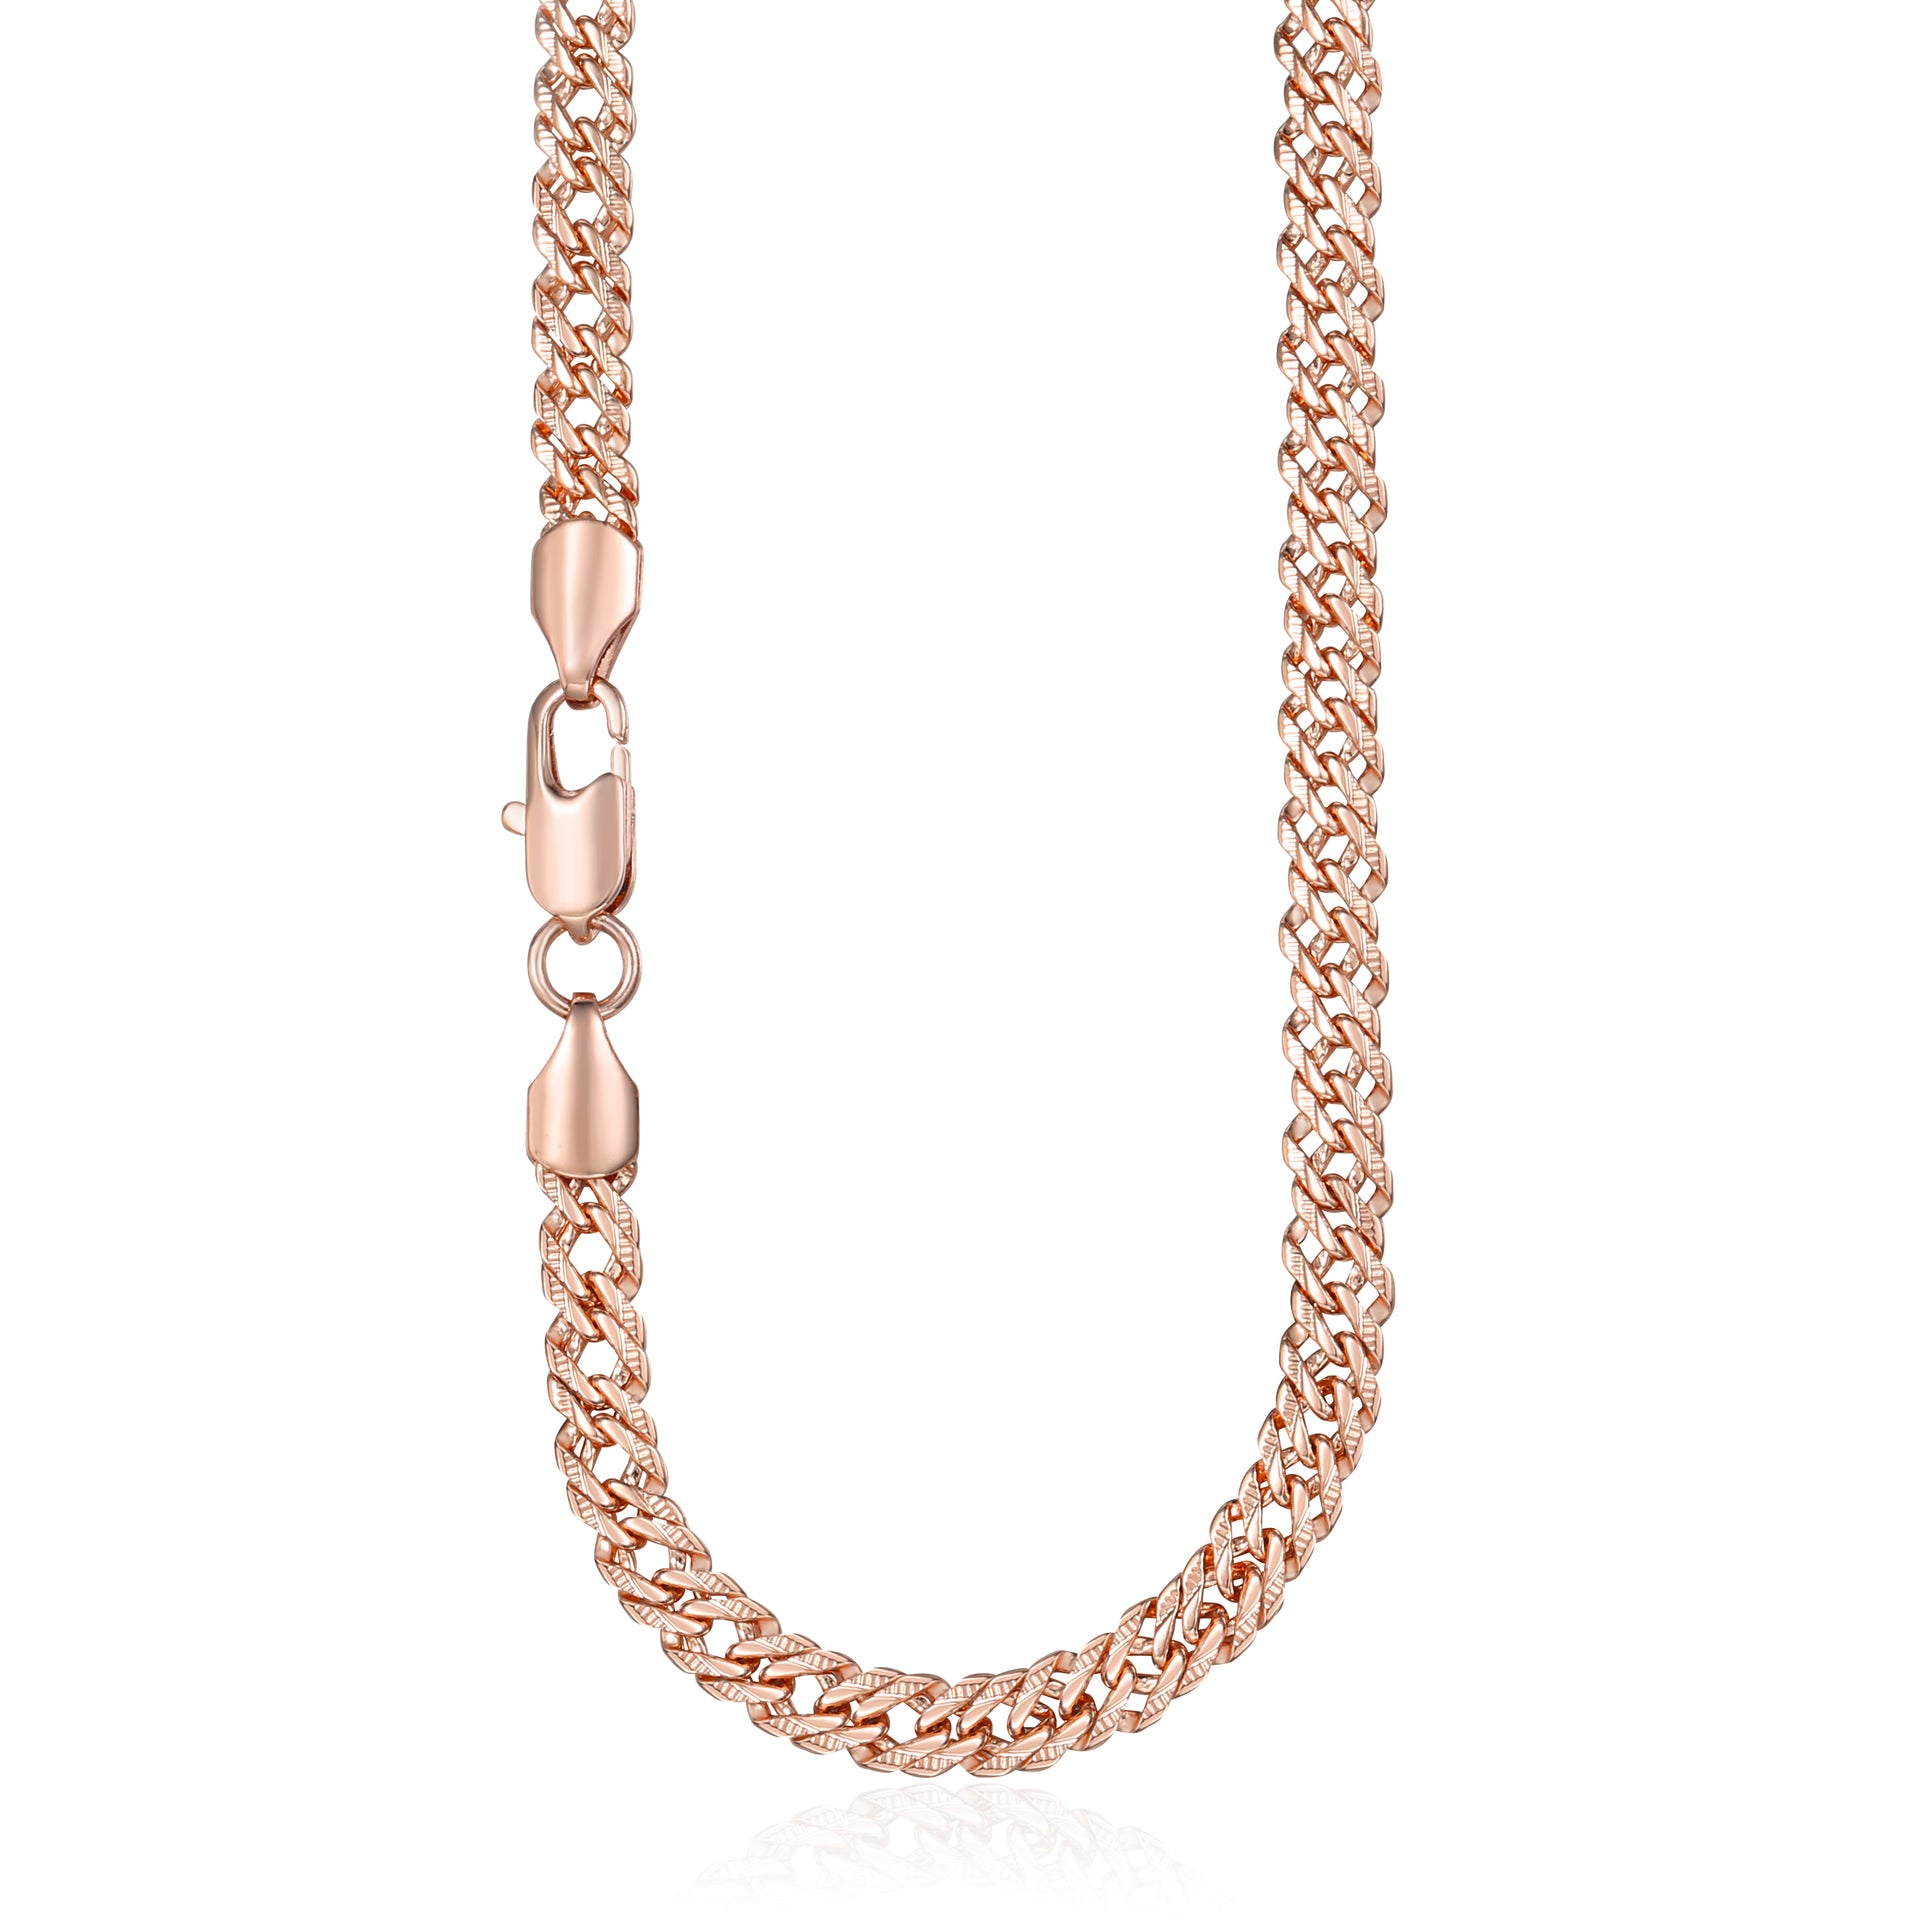 18 KGP Rose Gold Cable Chain Necklace Extension, 2.5 by Bling – Madaras  Gallery